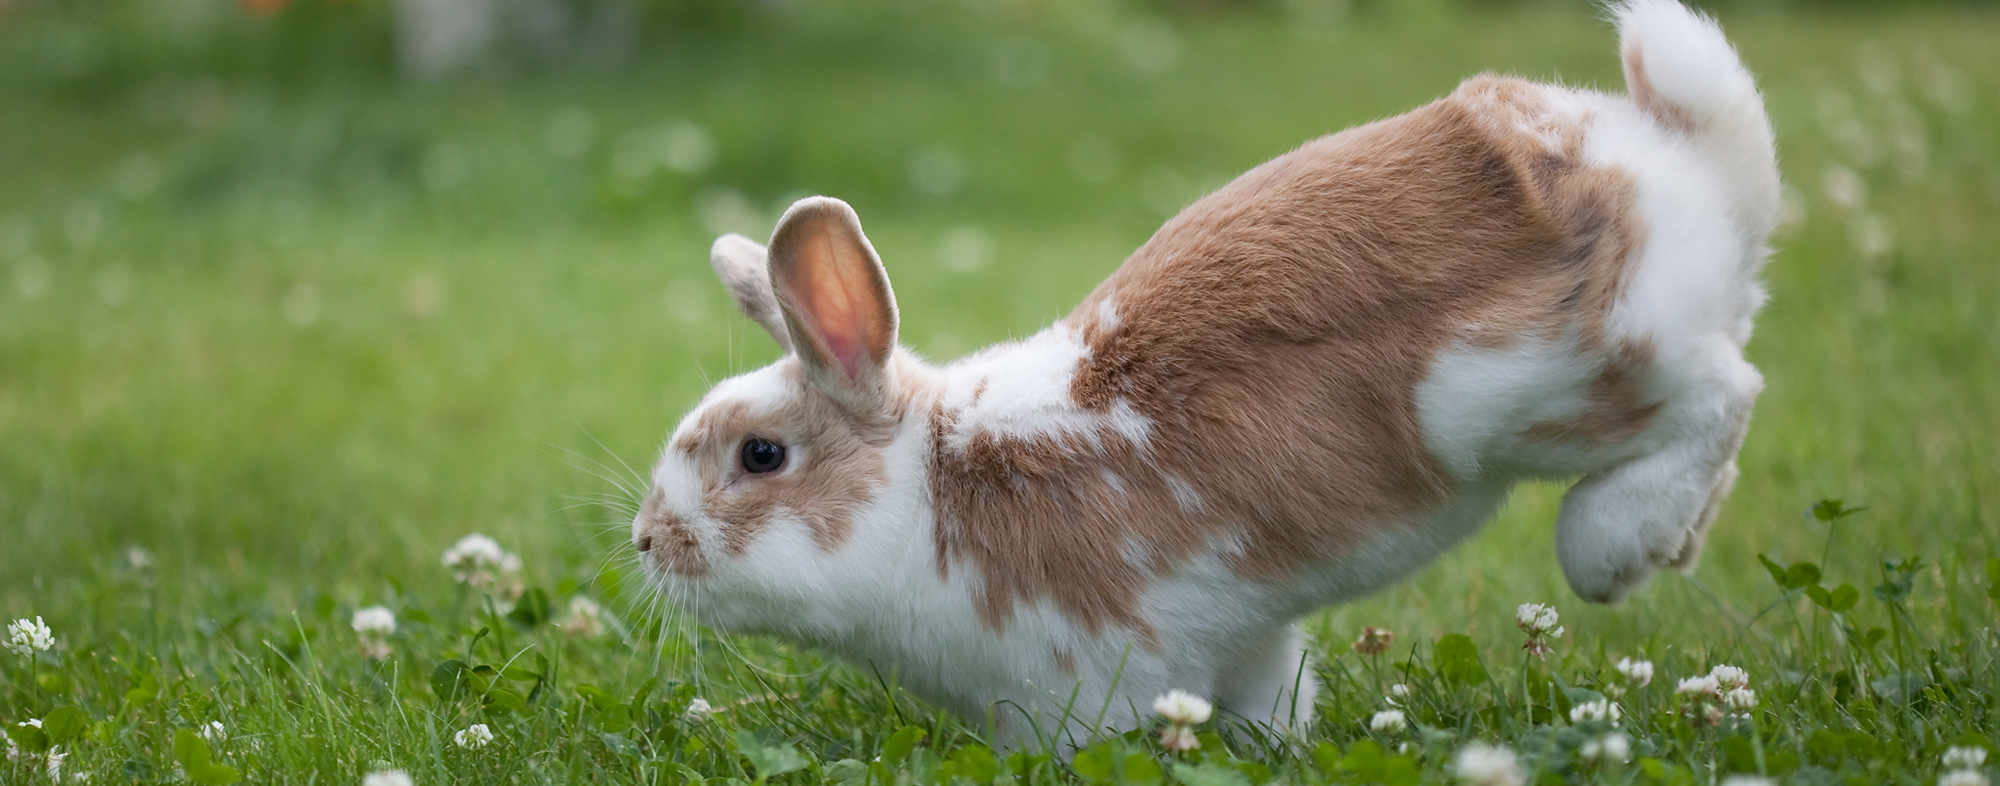 Pet rabbit hopping on the grass outside, thomping their hindlegs